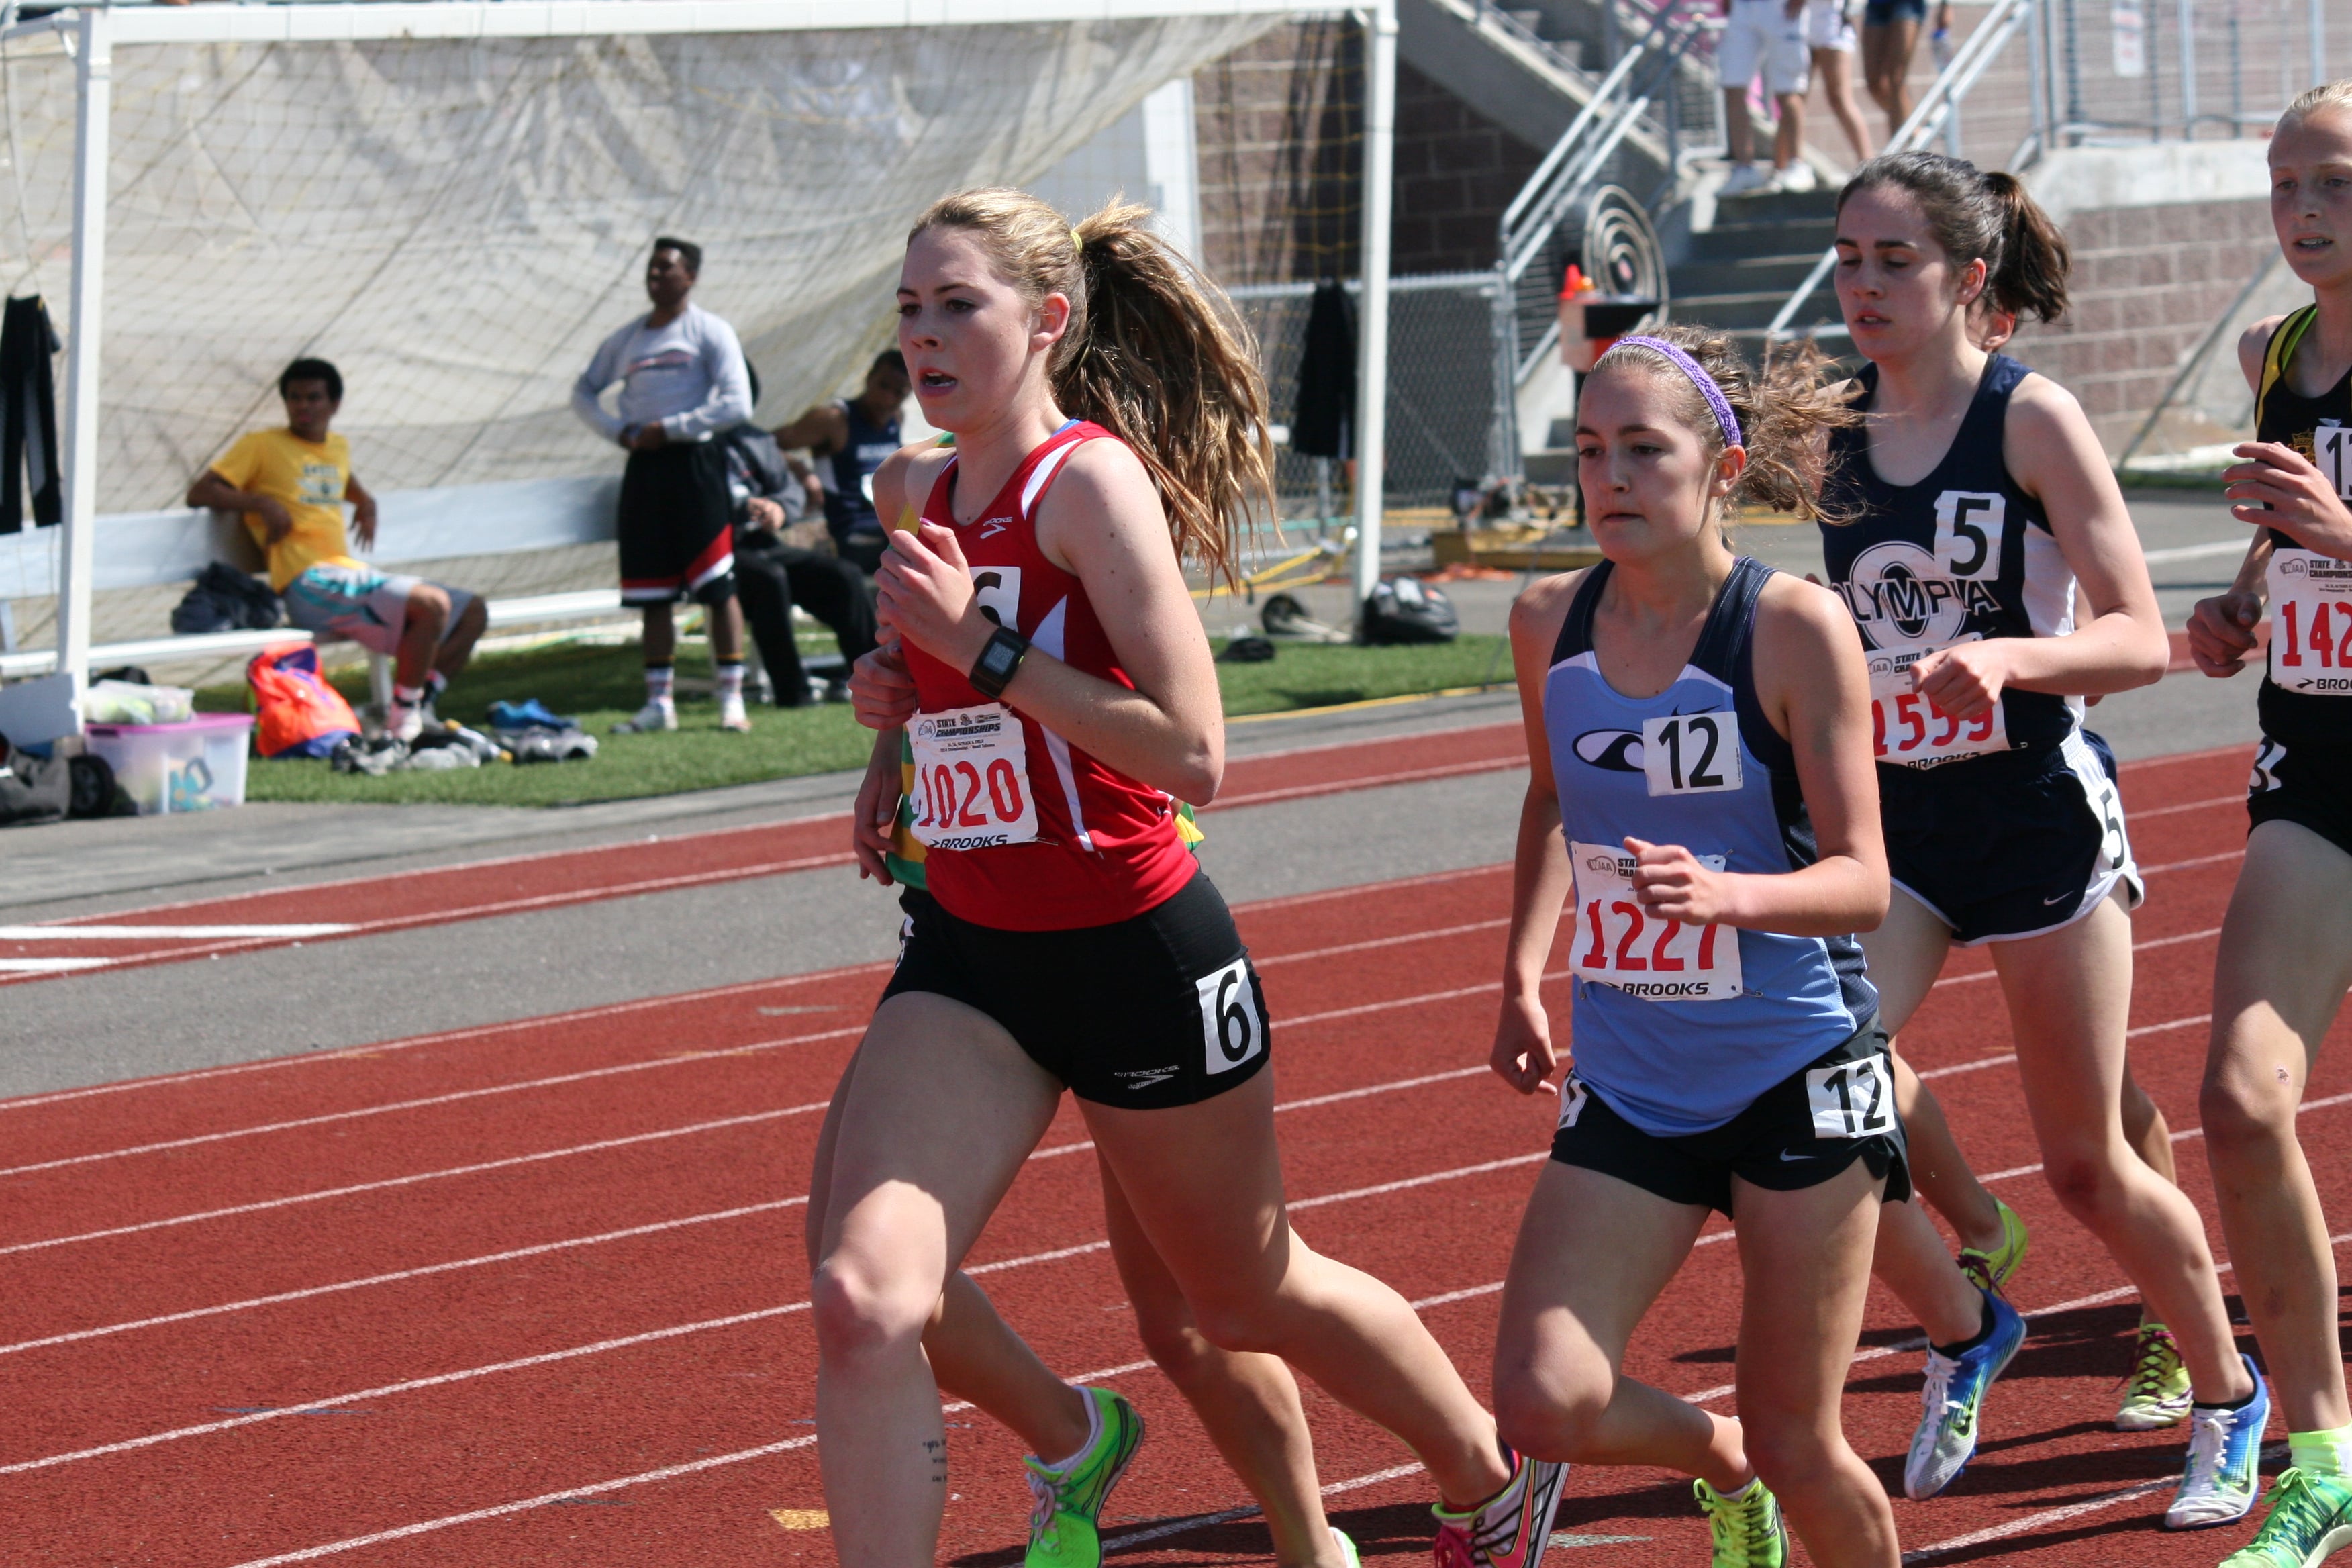 Alissa Pudlitzke is going for it. She looked strong for the first five laps and settled for sixth place in the 3,200.